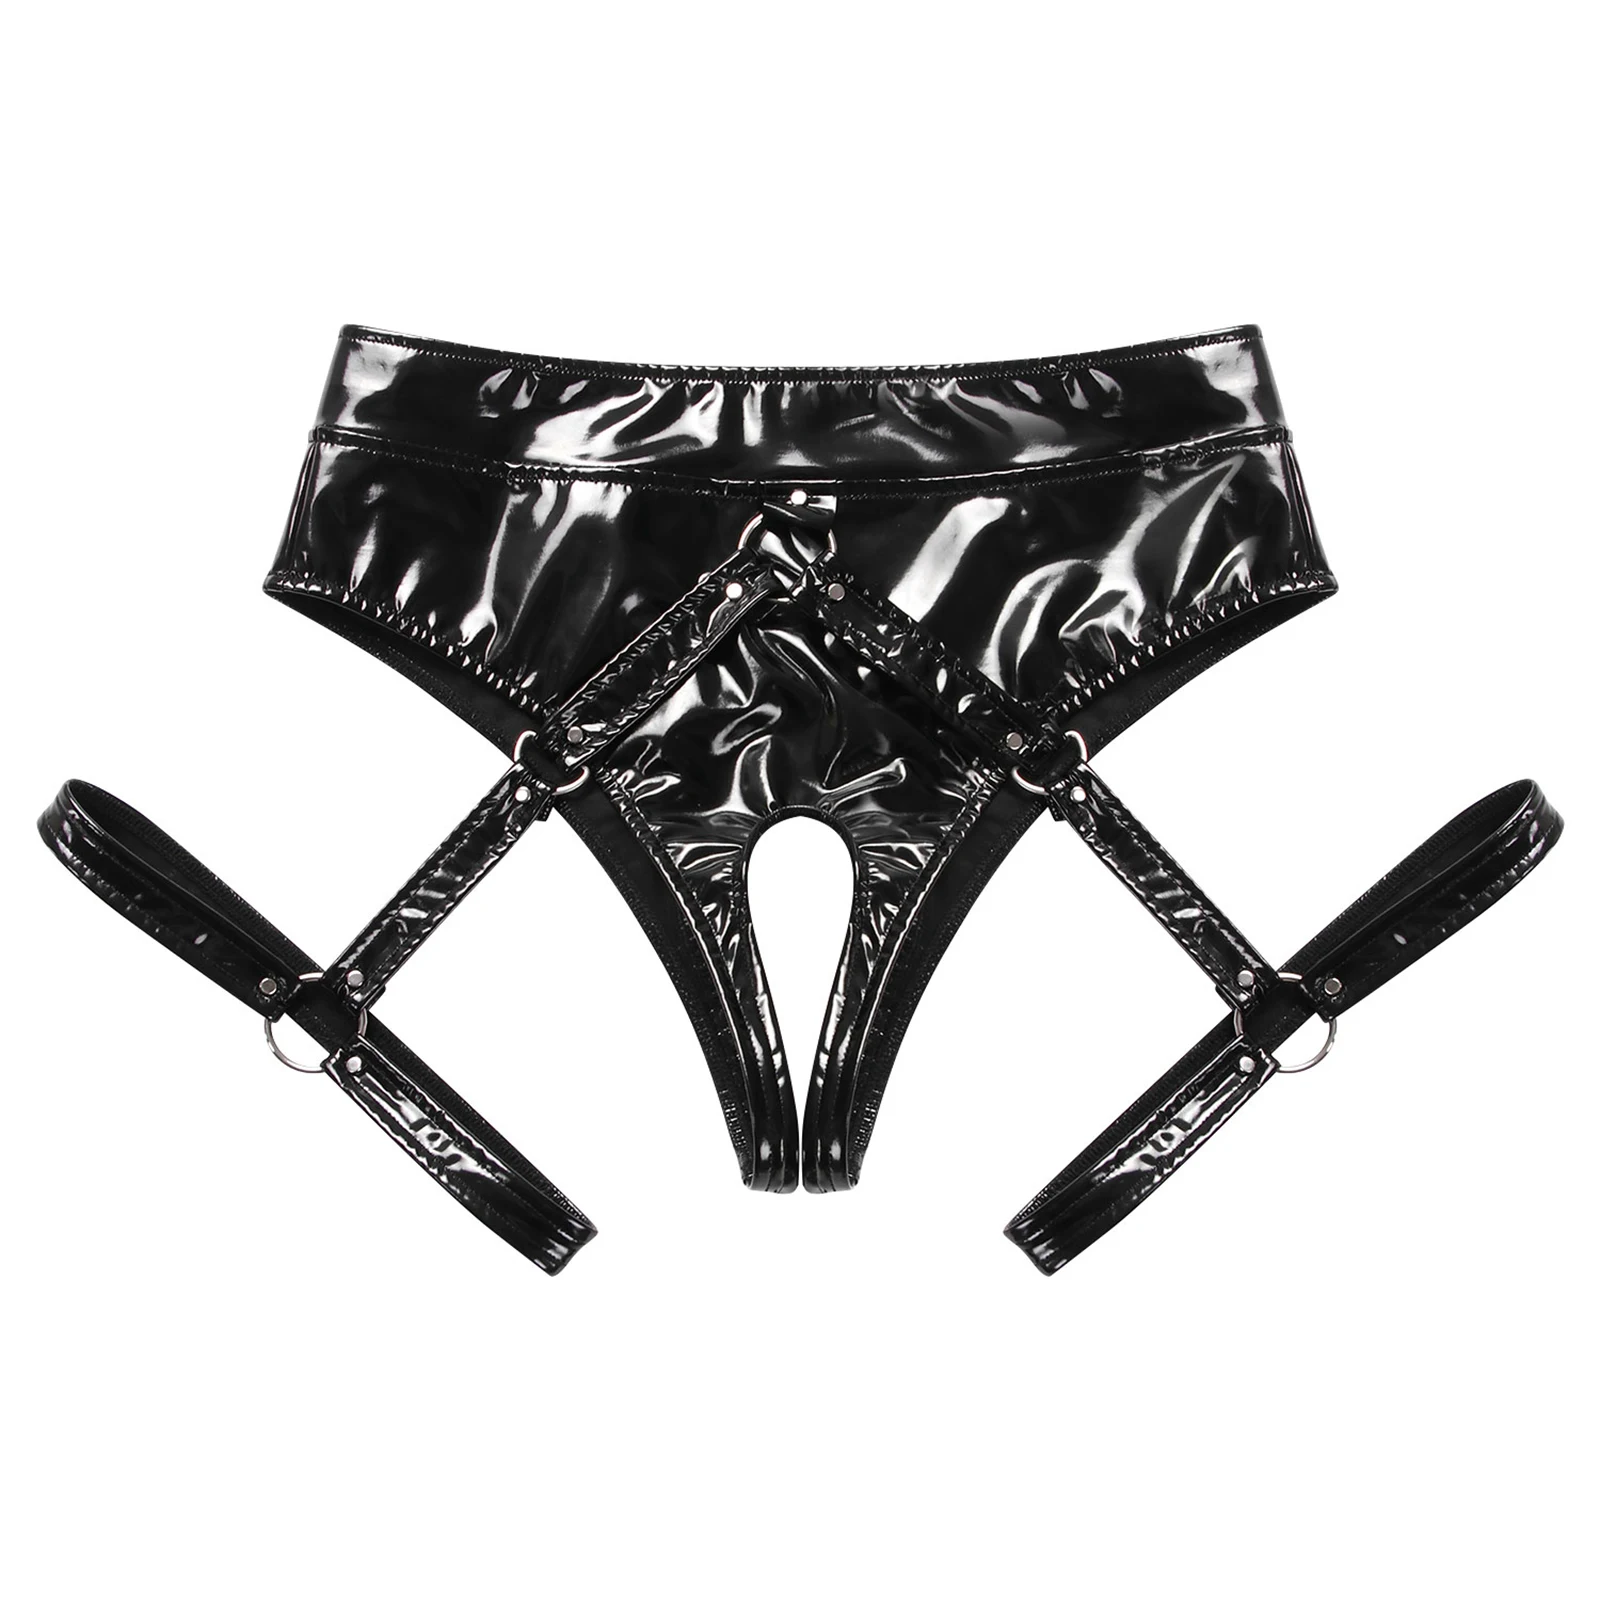 Dream about me - PVC Panties with Harnesses